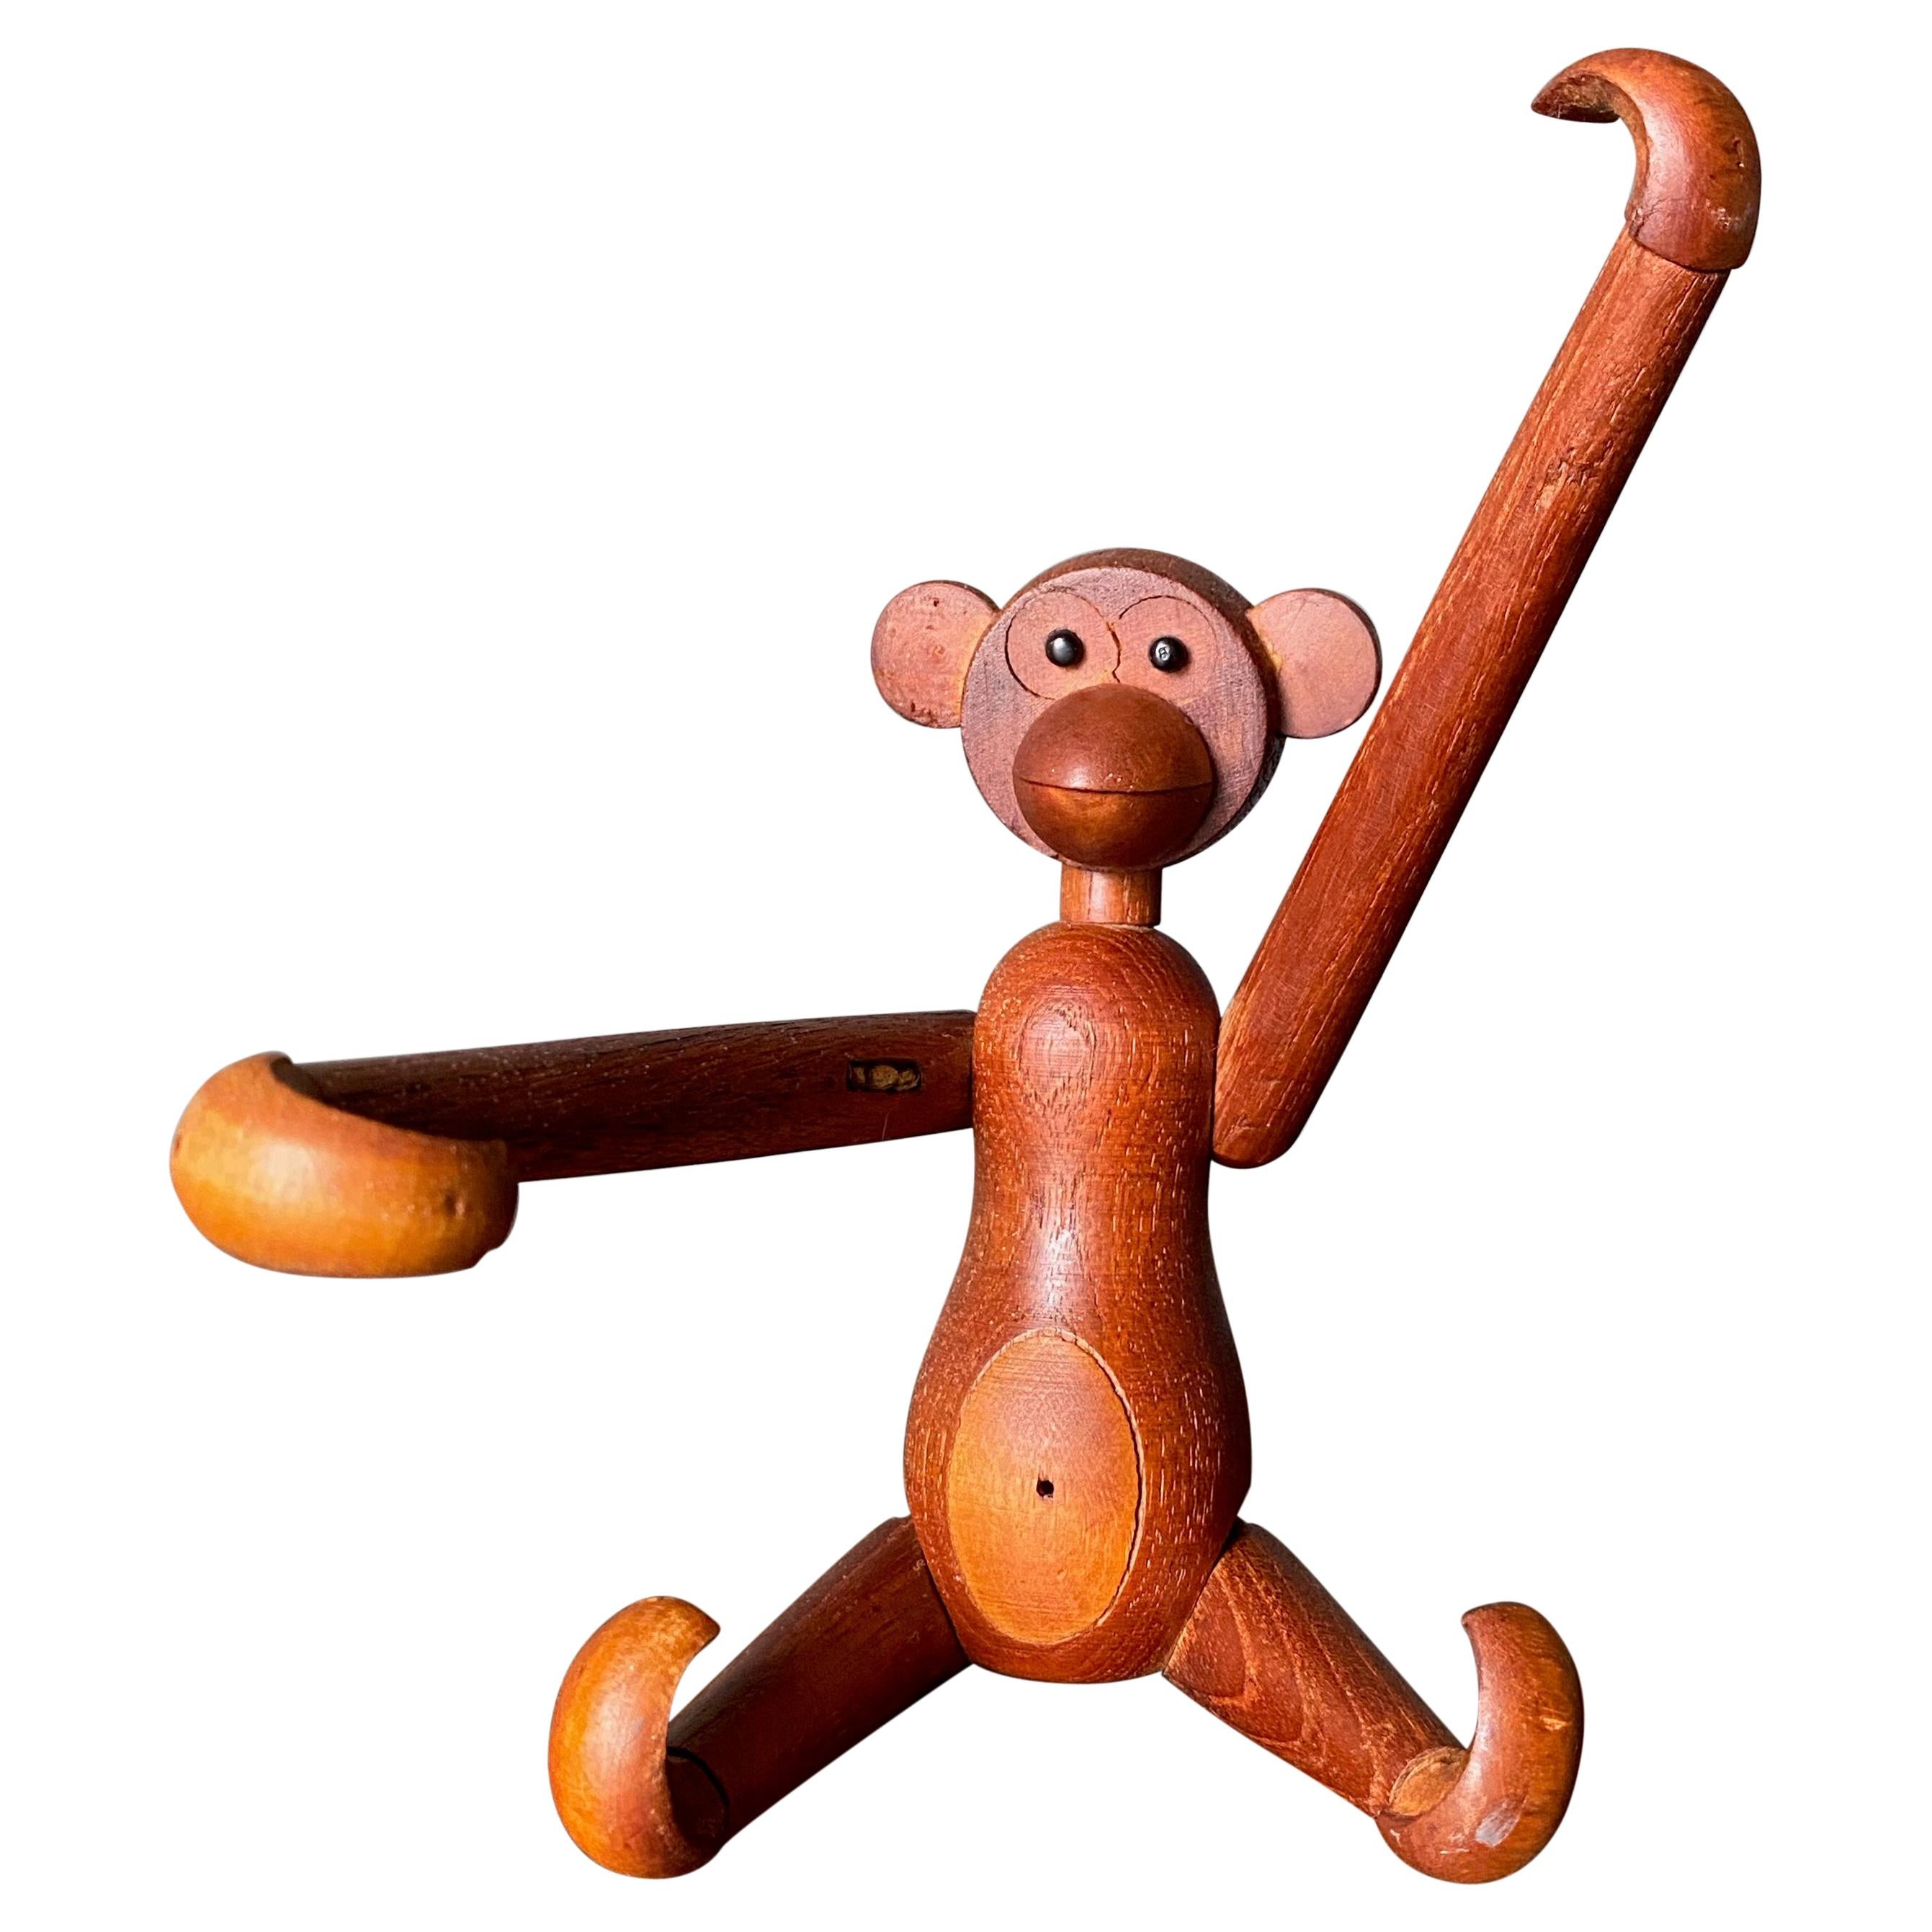 Articulated Teak Monkey in the Style of Kay Bojesen, circa 1960s